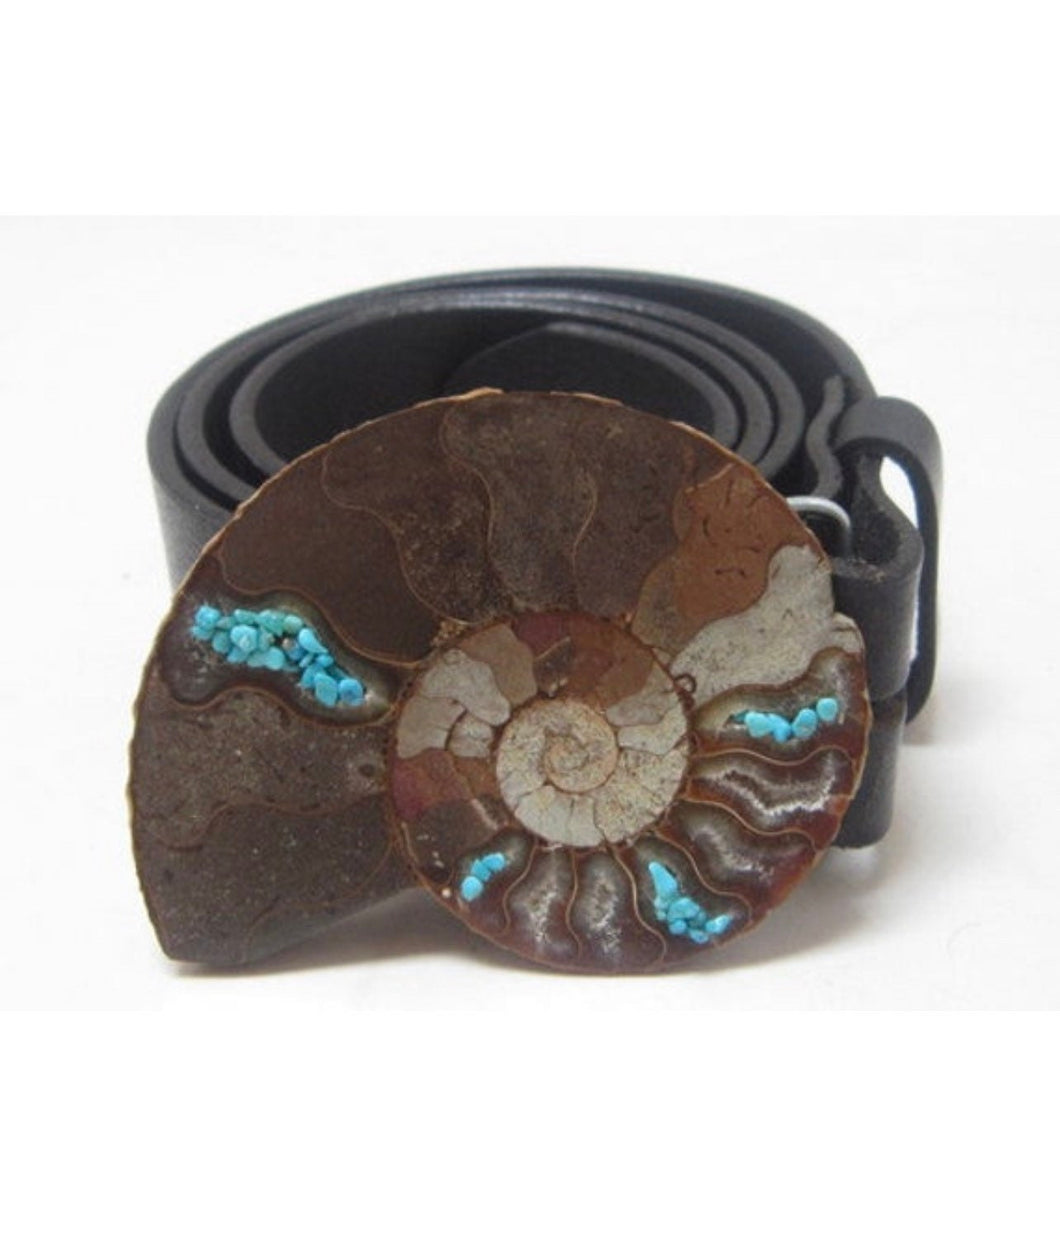 Ammonite and Turquoise Belt Buckle, Ammonite Belt Buckle, Fossil Belt Buckle, Gemstone Belts, Leather Belts, Snap Belts, Accessories,